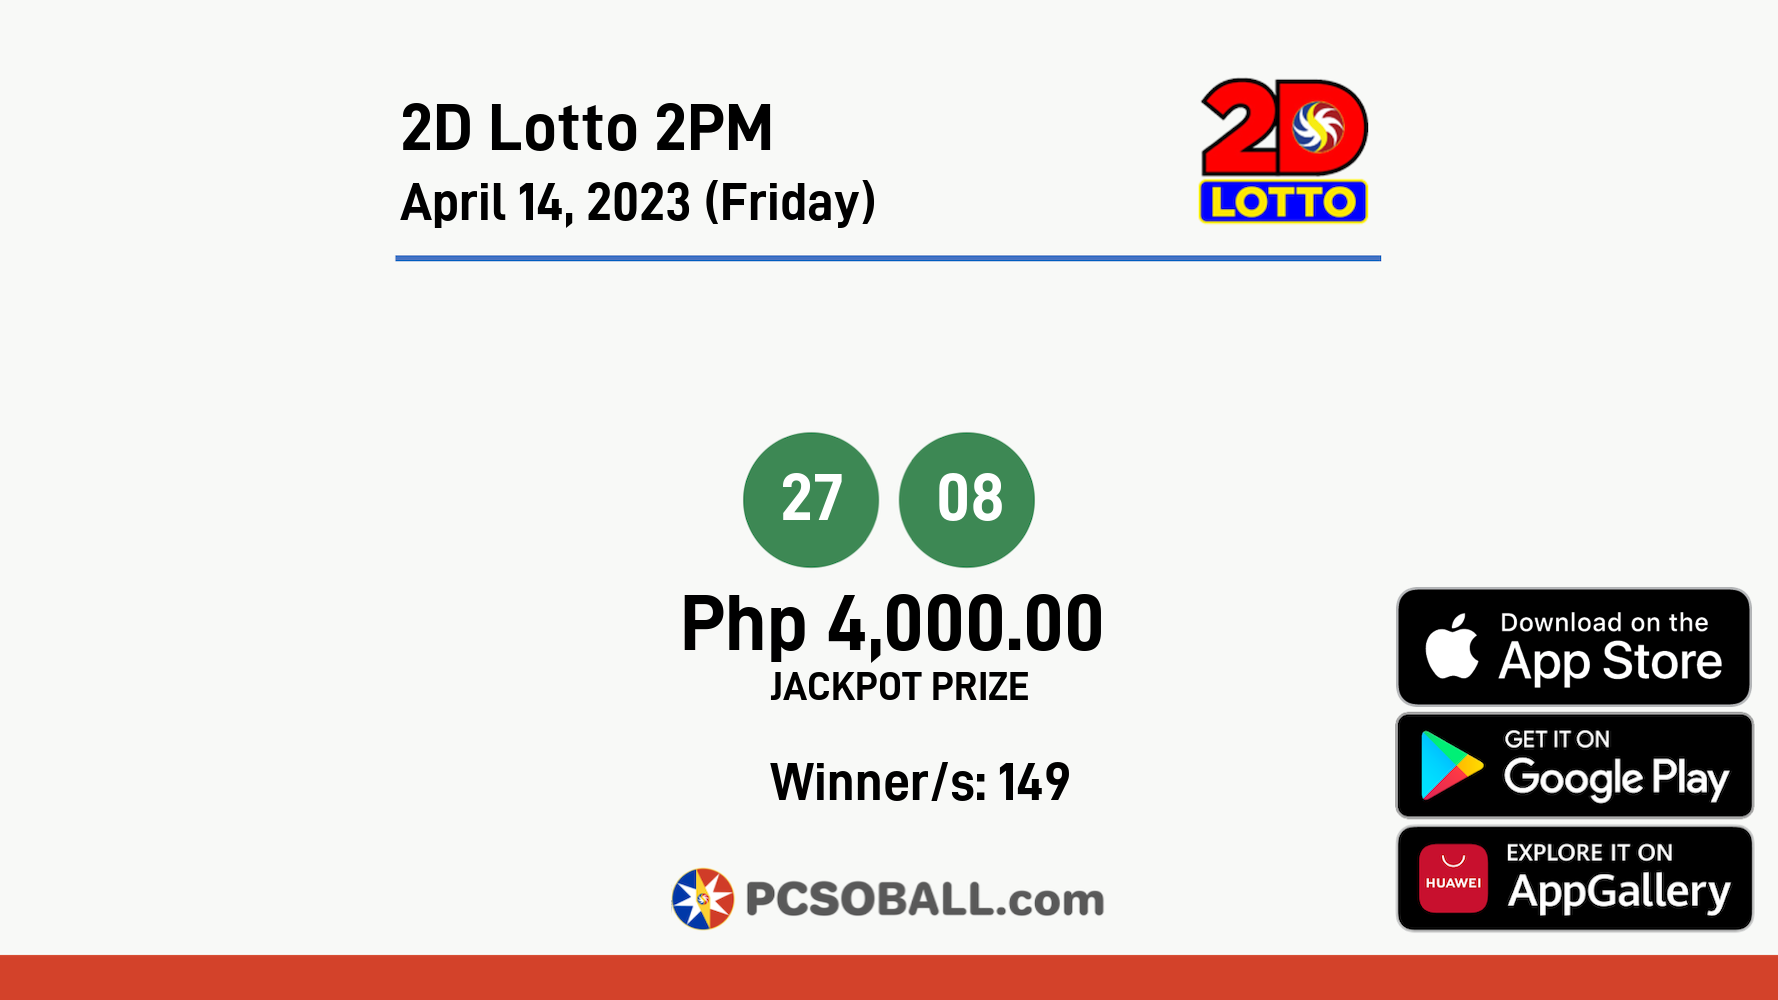 2D Lotto 2PM April 14, 2023 (Friday) Result